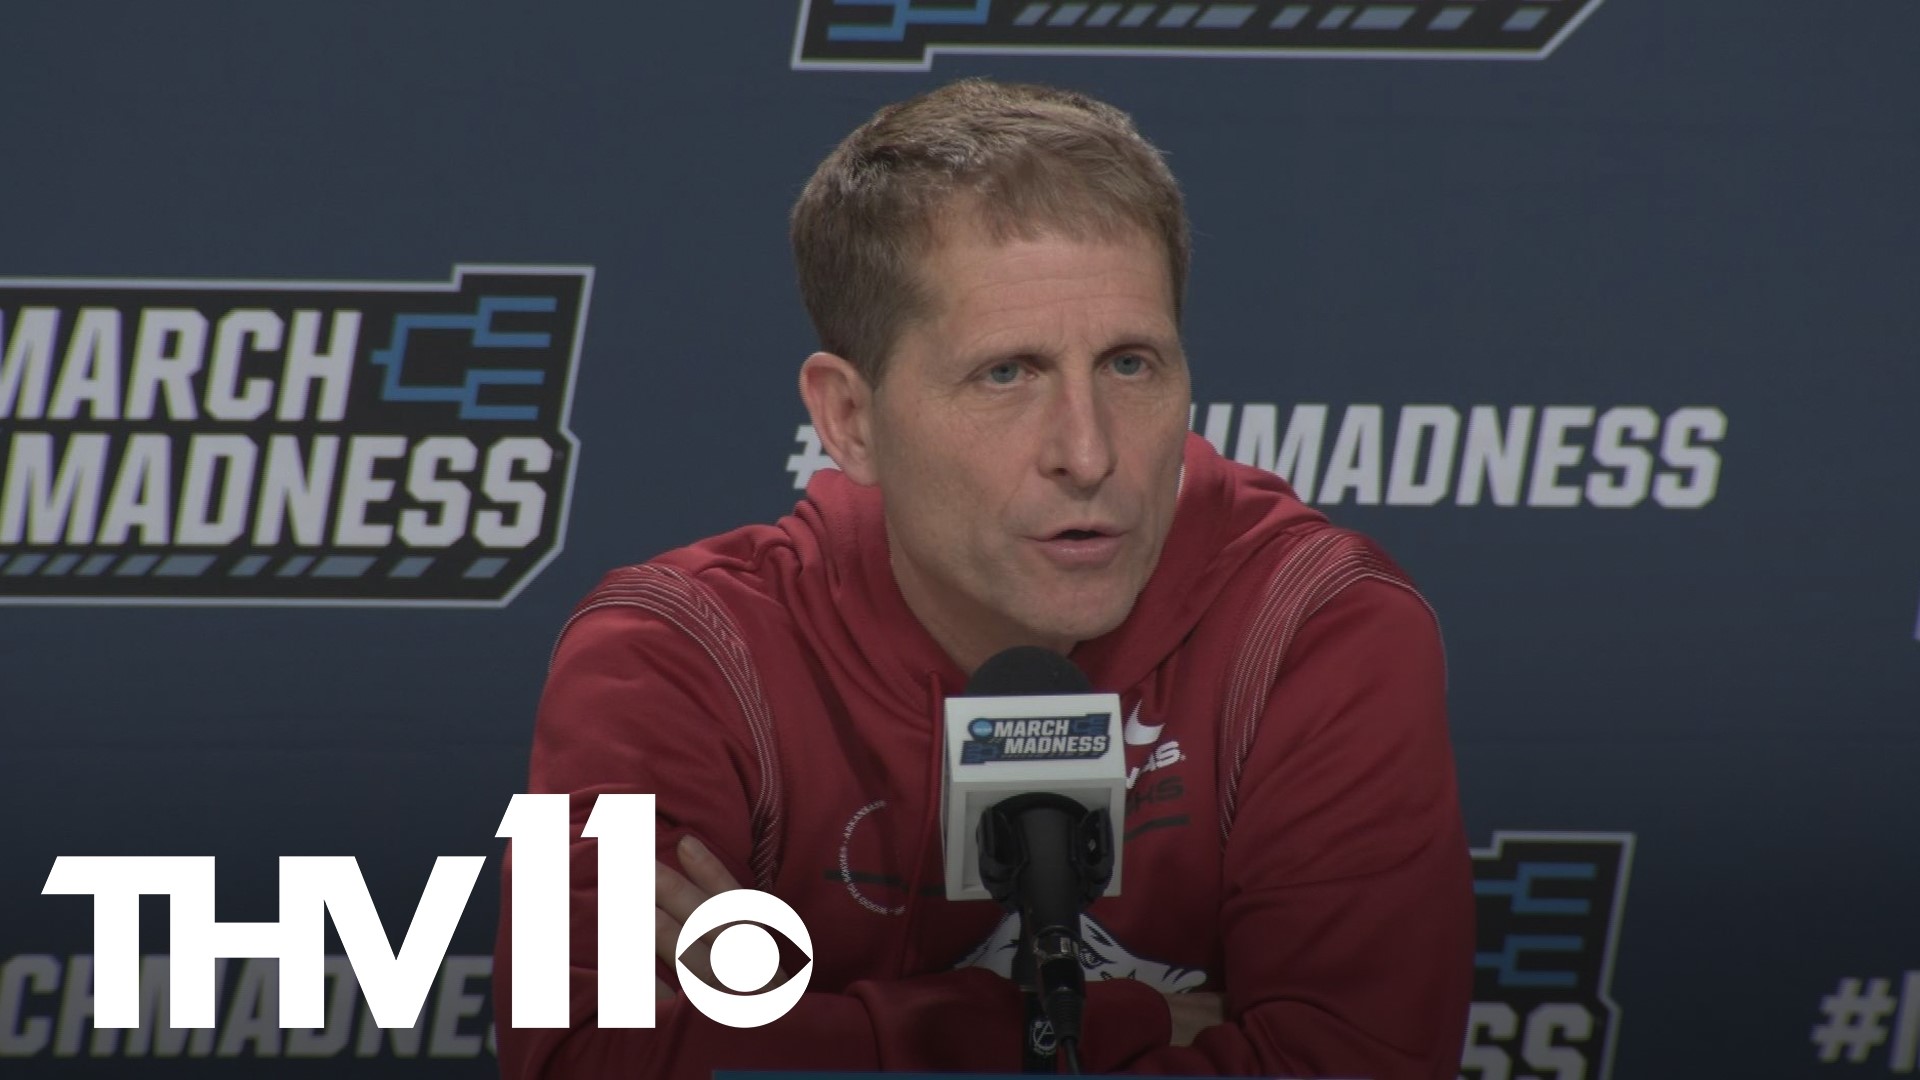 Arkansas is facing a No. 1 seed in the NCAA Tournament for a third straight year. Arkansas coach Eric Musselman discusses what the Hogs must do to upset Kansas.